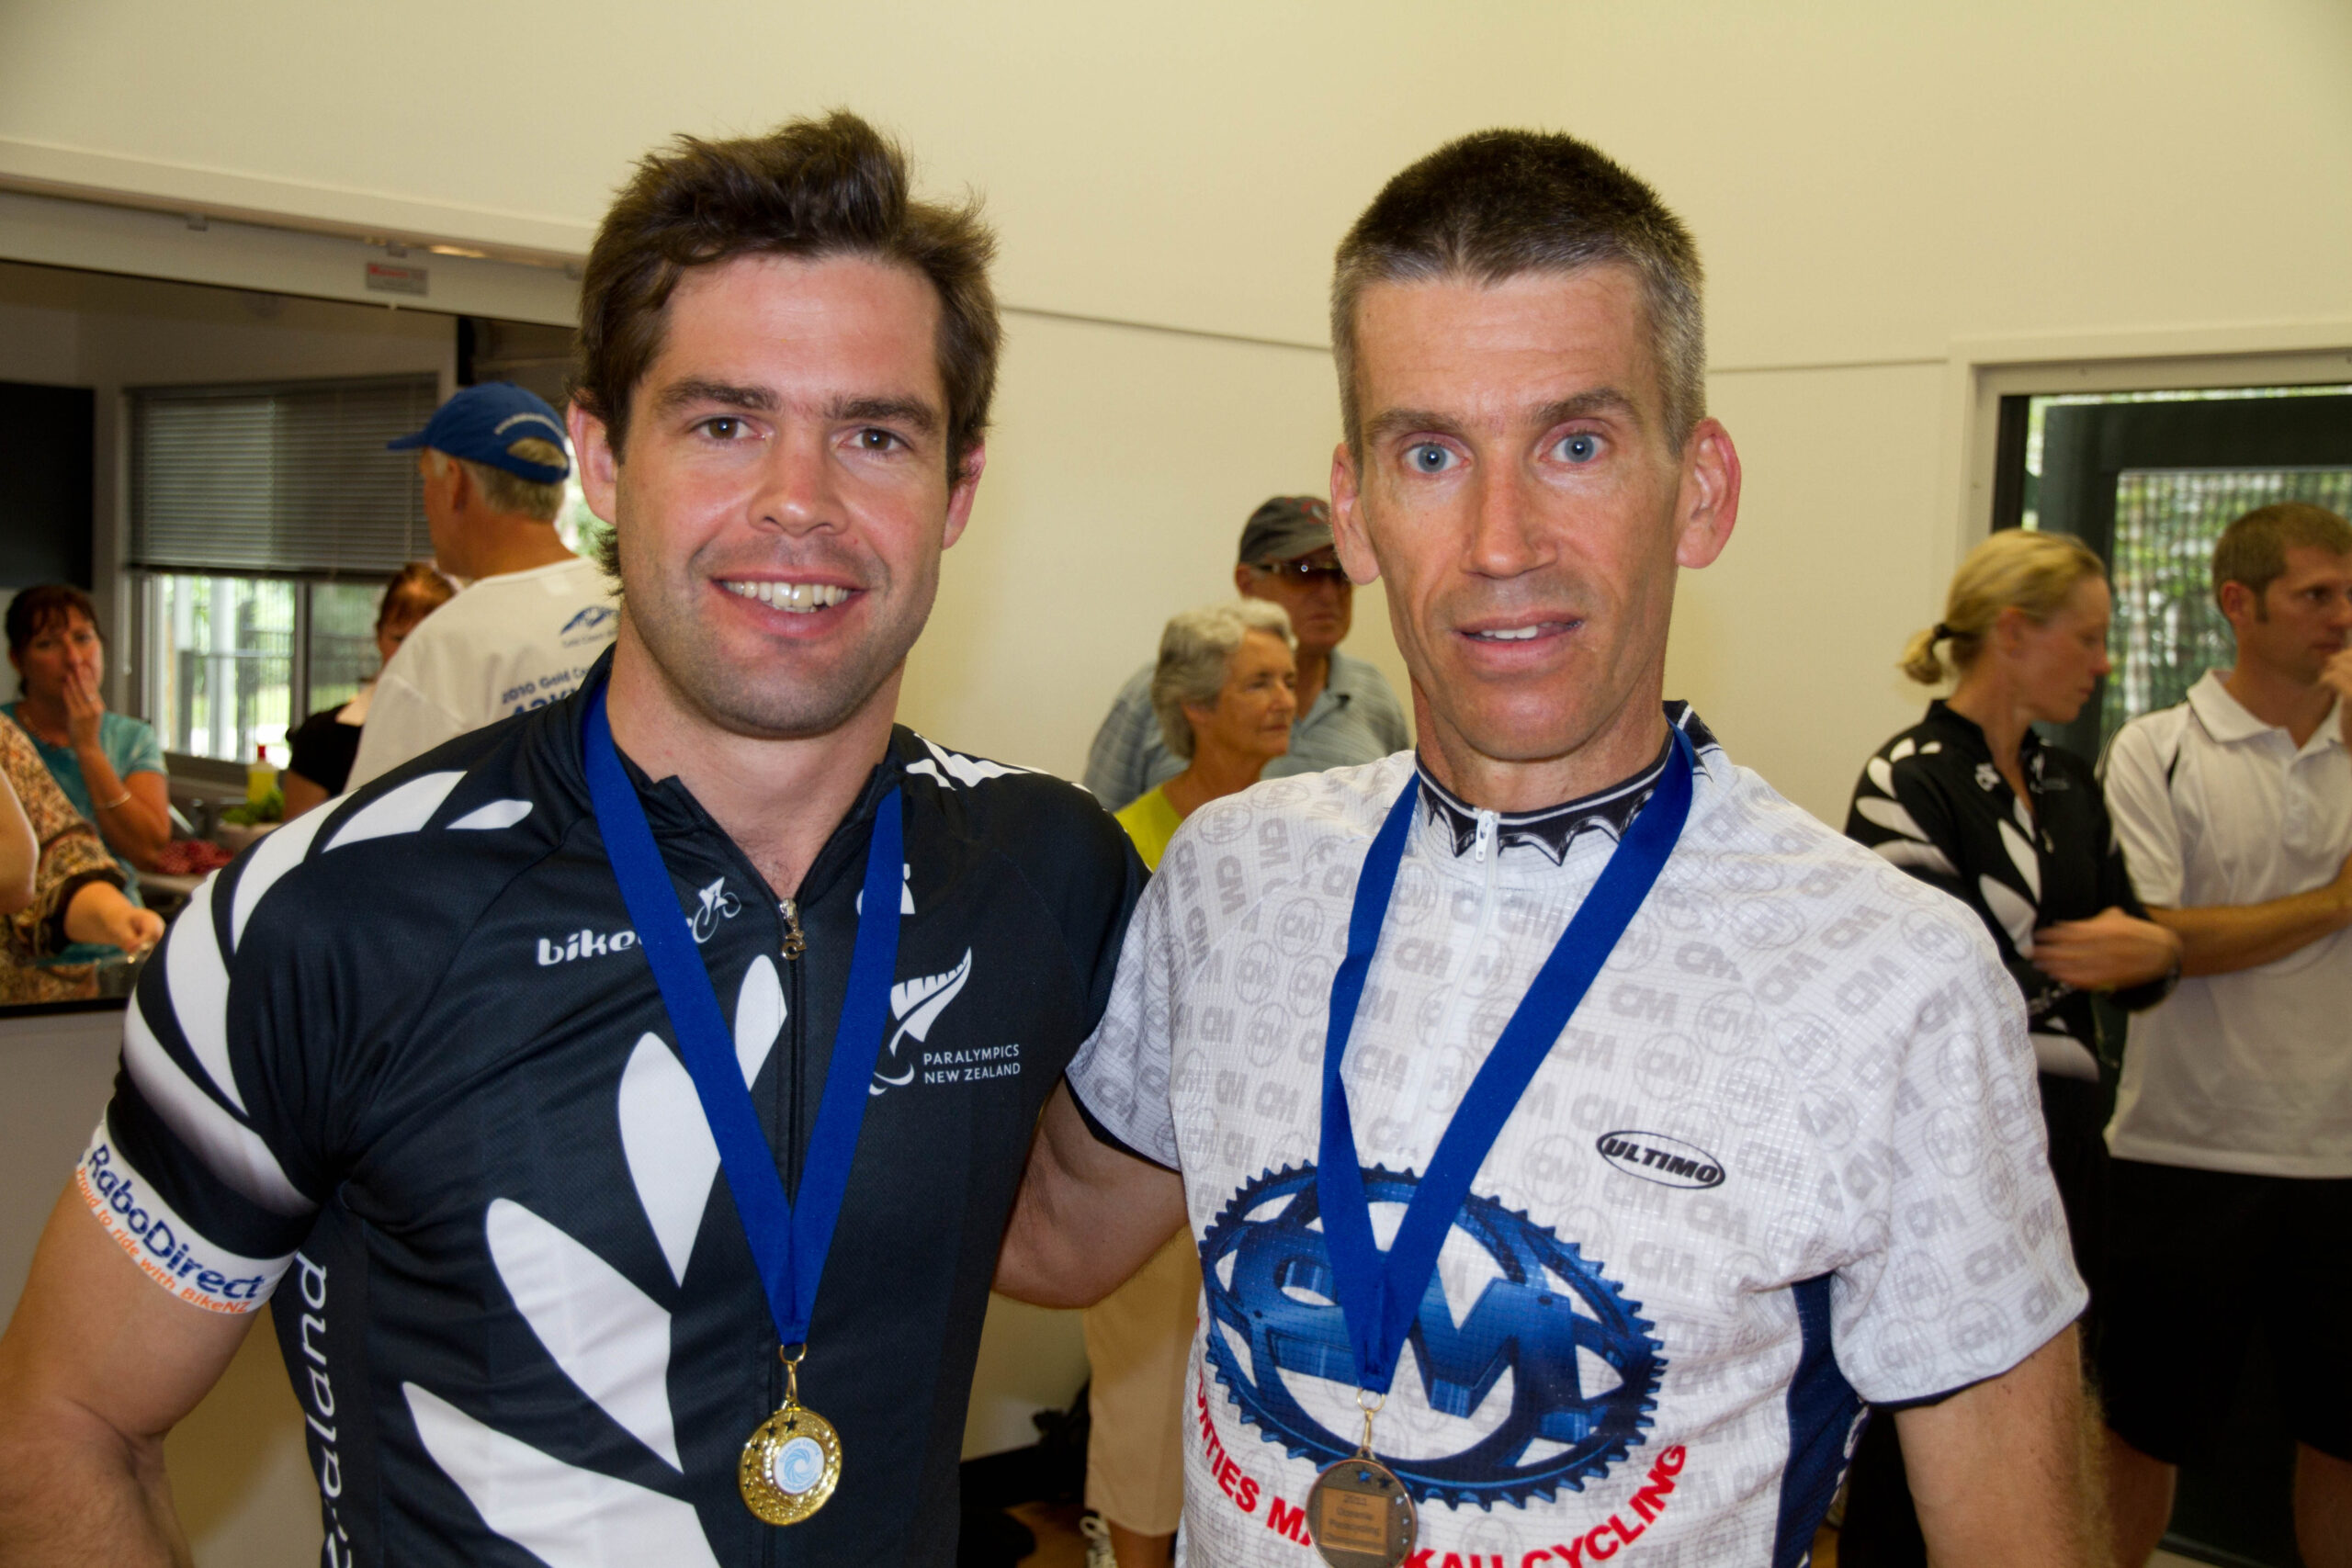 Two male cyclists with medals, indoors